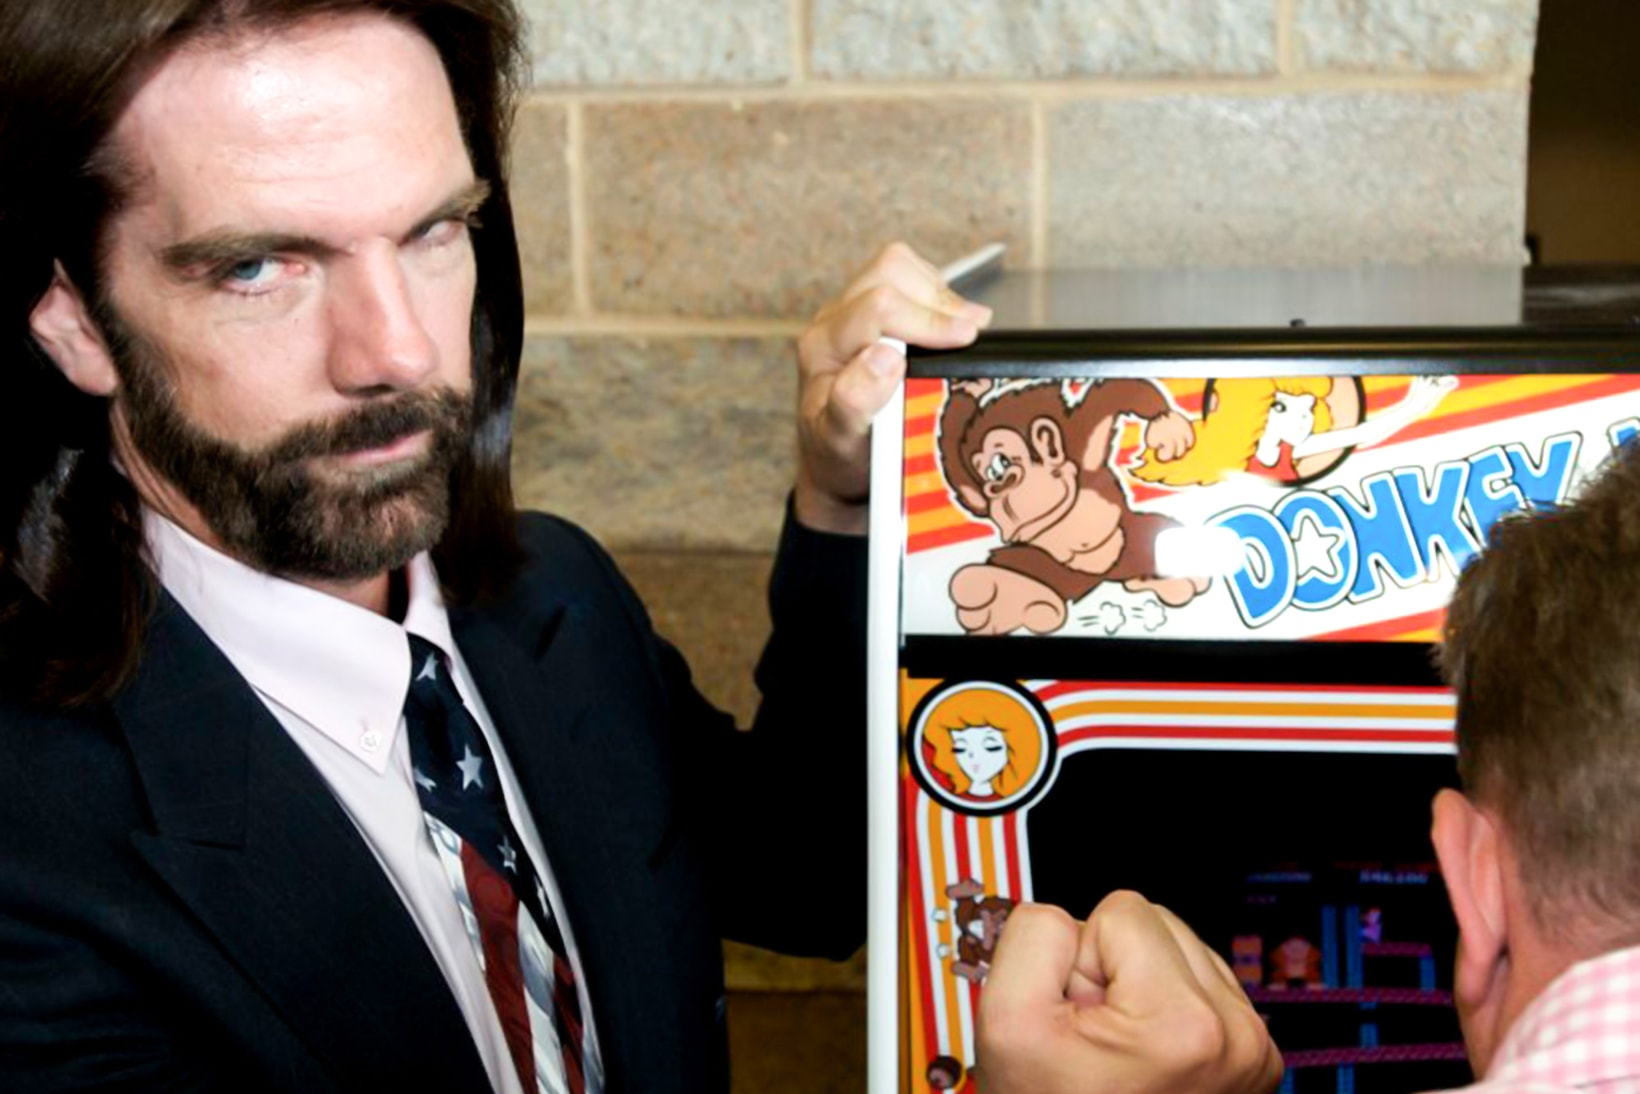 King of Kong Donkey Kong Arcade Billy Mitchell Steve Weibe cheater stripped banned